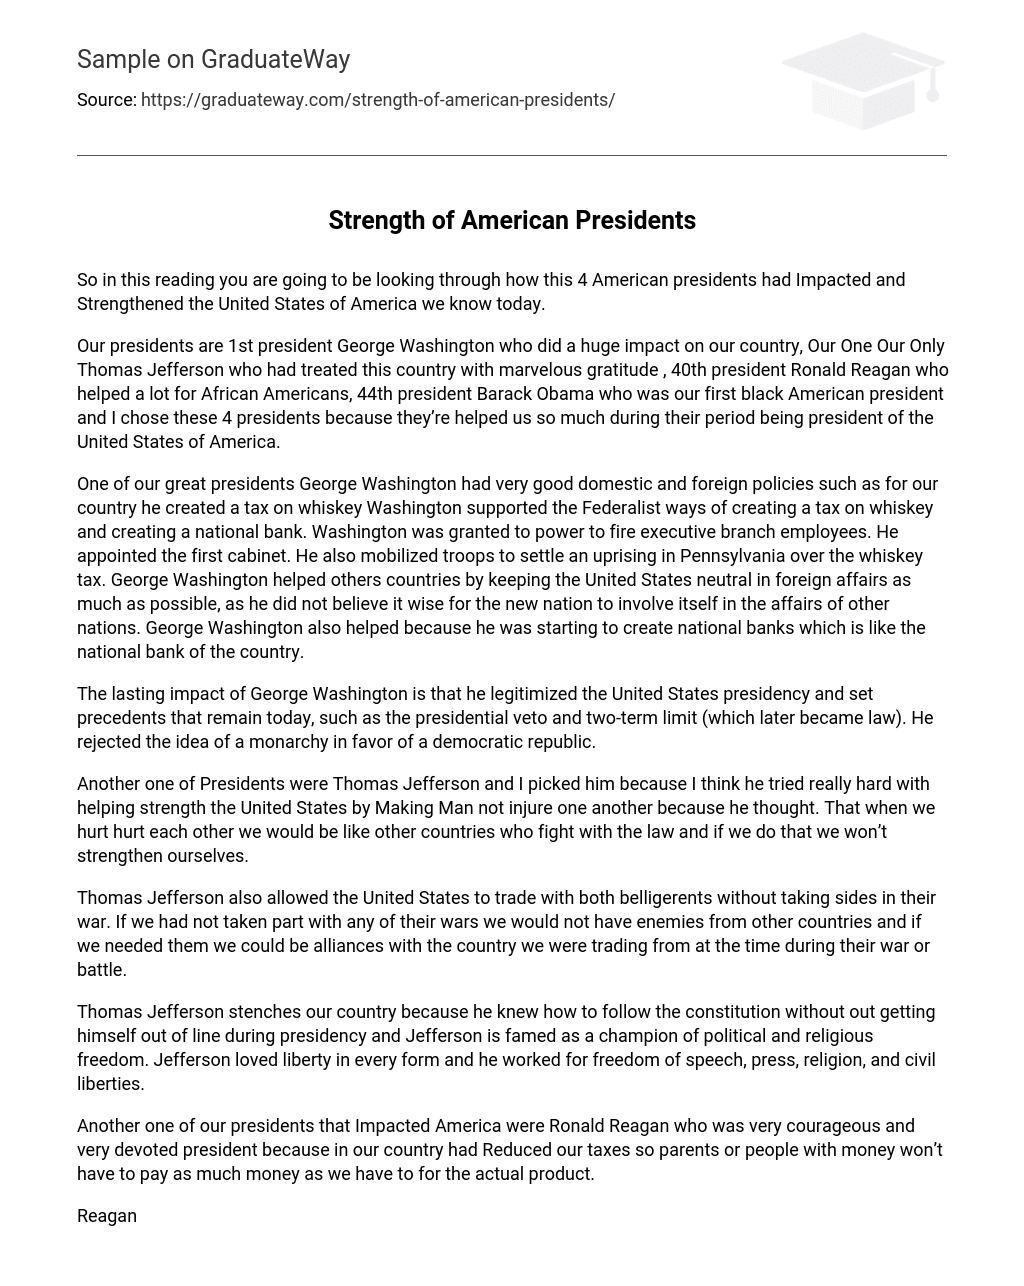 Strength of American Presidents